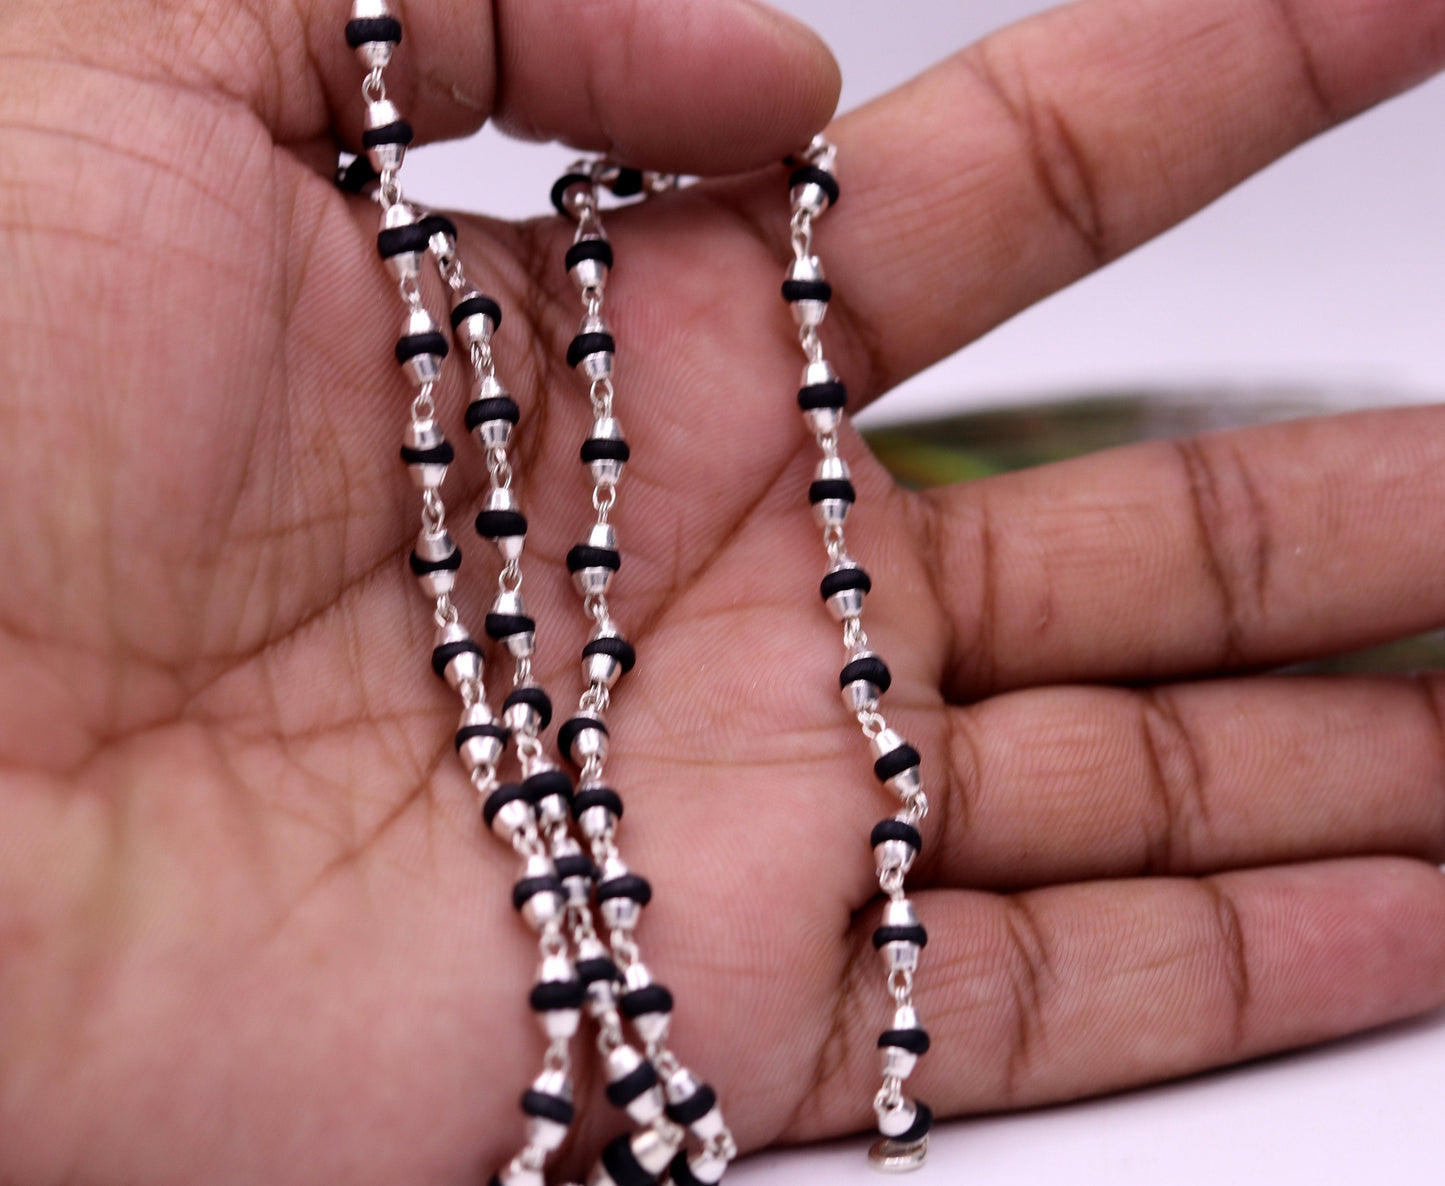 Sterling silver black basil rosary wood beads chain 20 inches necklace for meditation excellent unisex tulsimala from india ch41 - TRIBAL ORNAMENTS